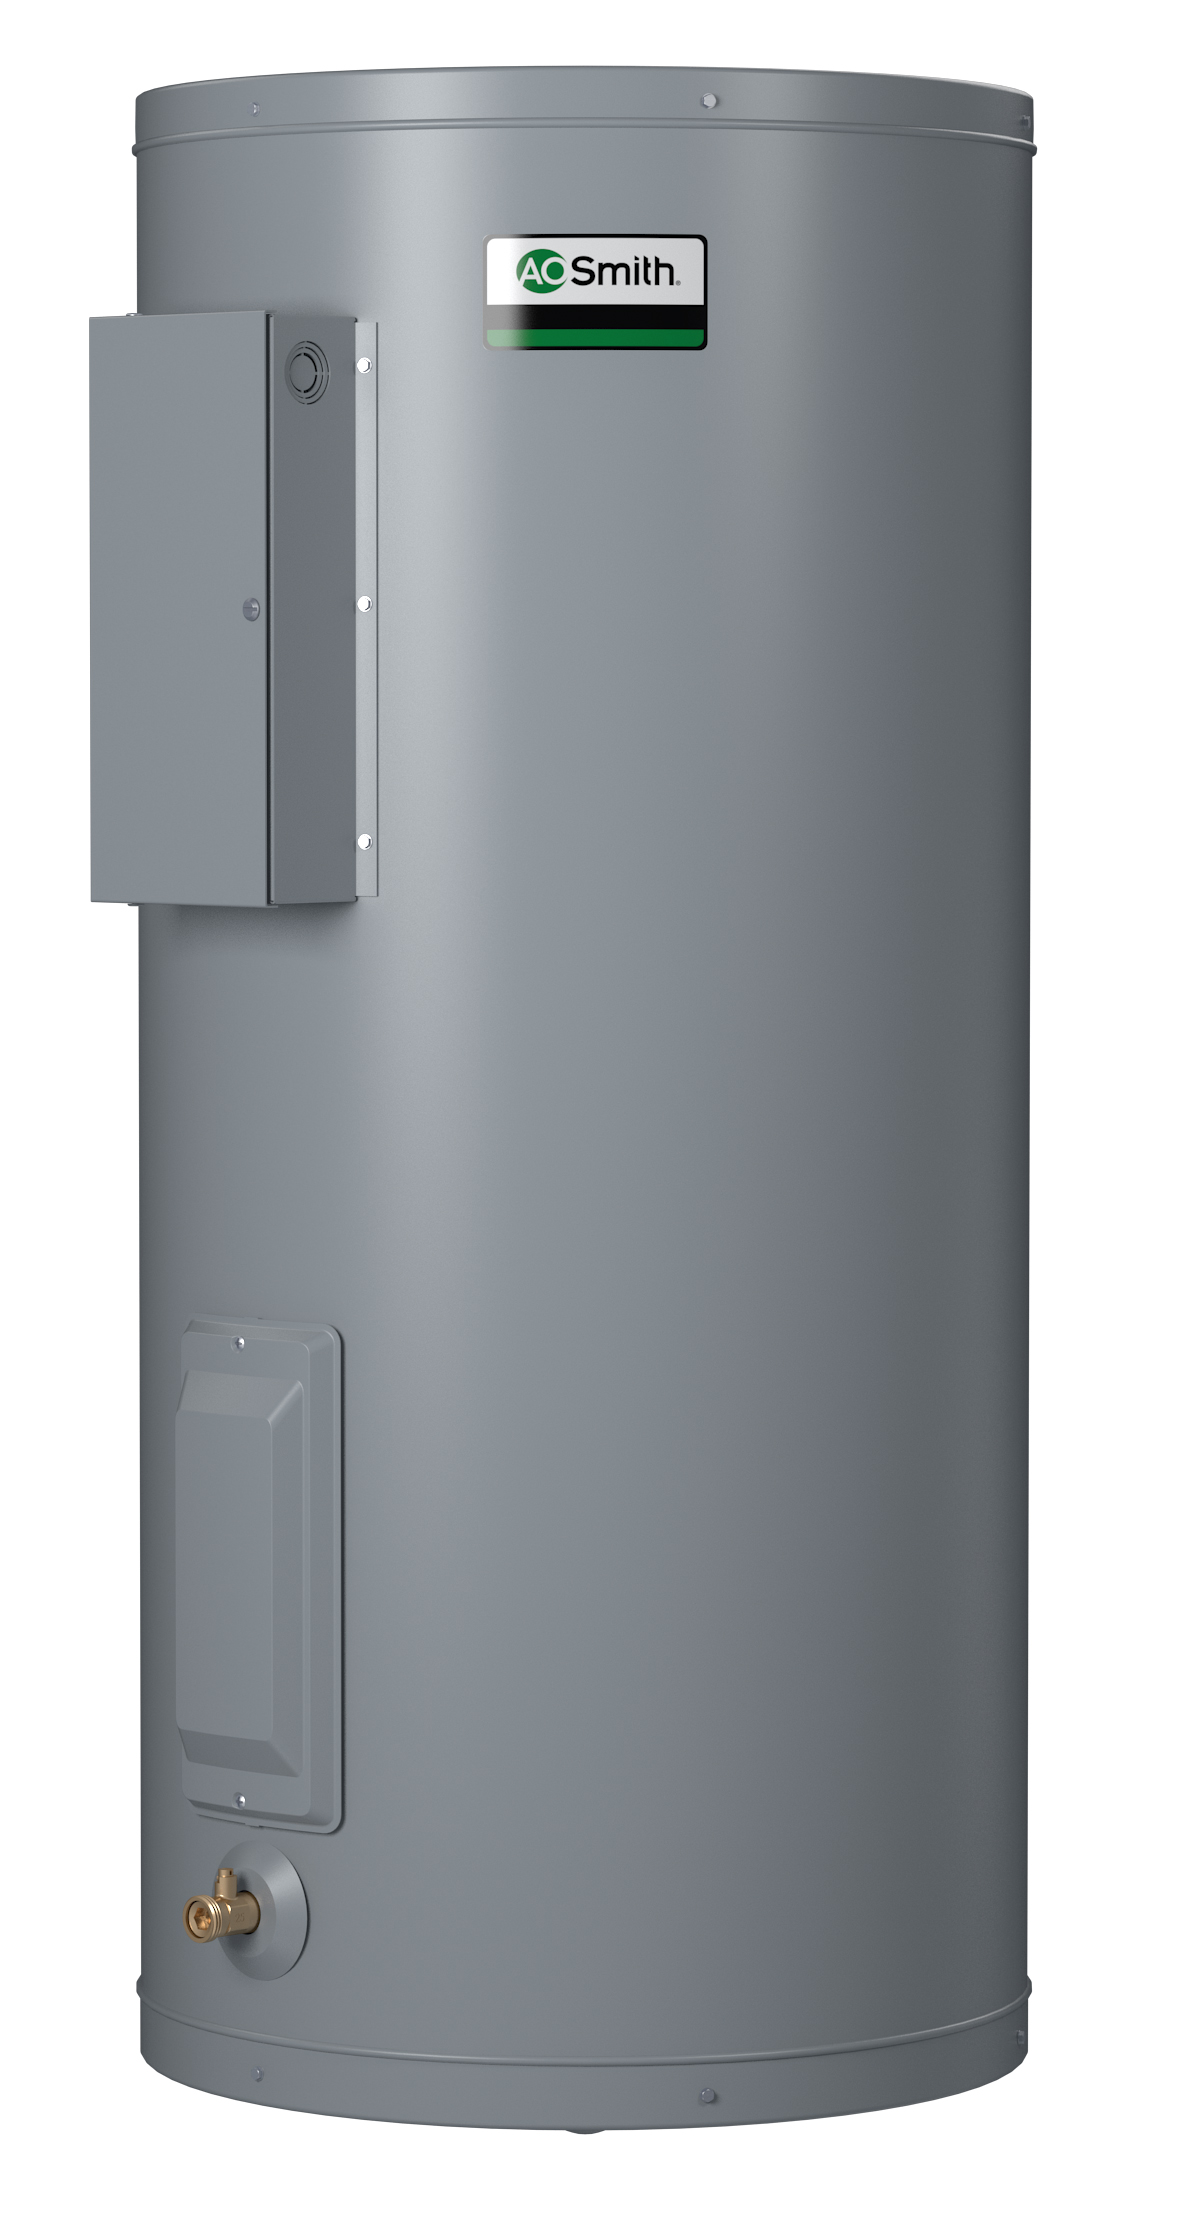 AO SMITH DEN-120D: 120 GALLONS, 2.0KW, 208 VOLT, 1 PHASE, (2-2000 WATT ELEMENTS, NON-SIMULTANEOUS WIRING), DURA-POWER, LIGHT DUTY COMMERCIAL ELECTRIC WATER HEATER